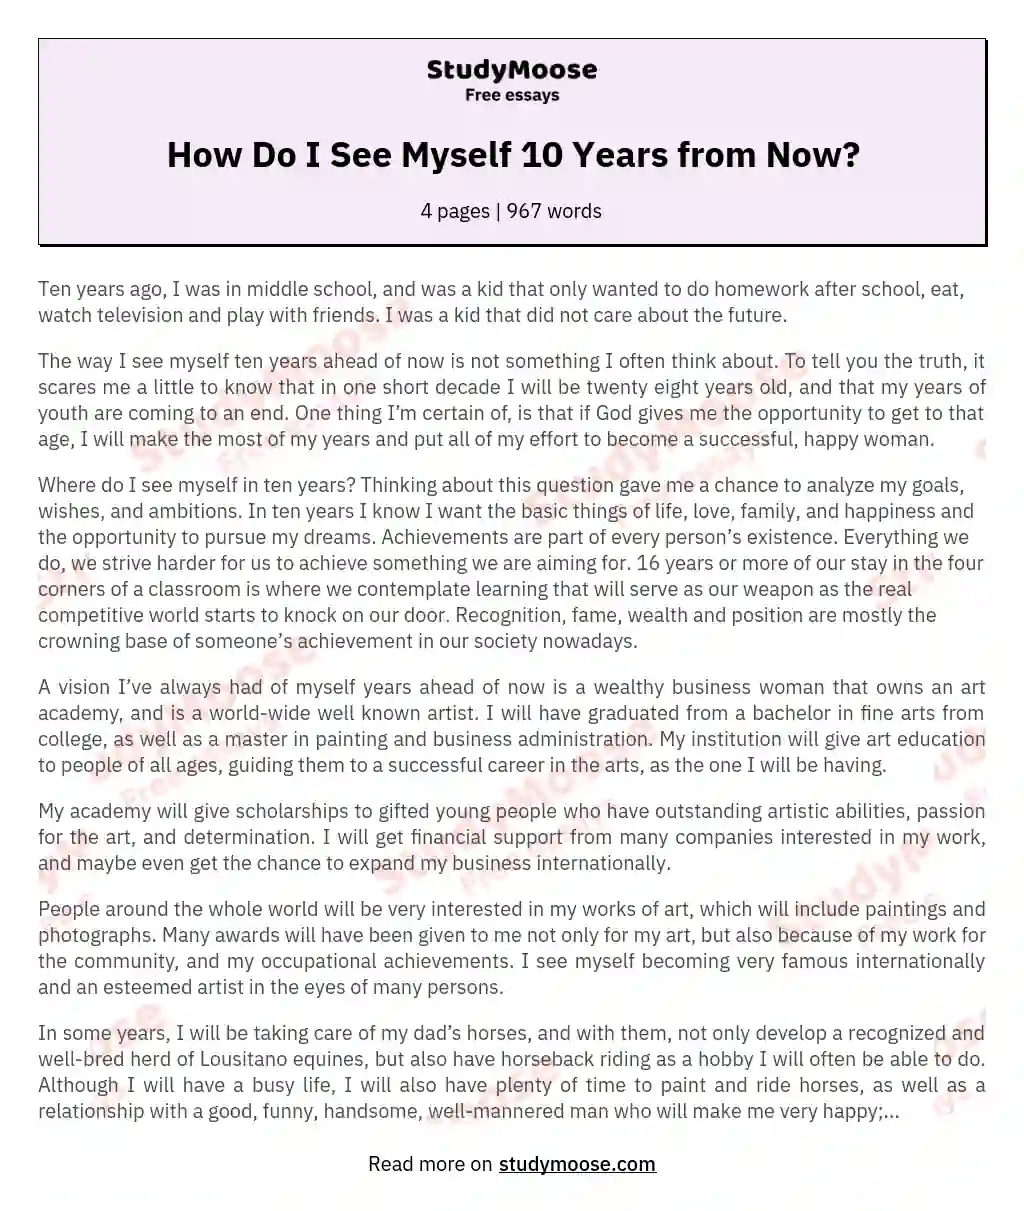 How Do I See Myself 10 Years from Now? essay